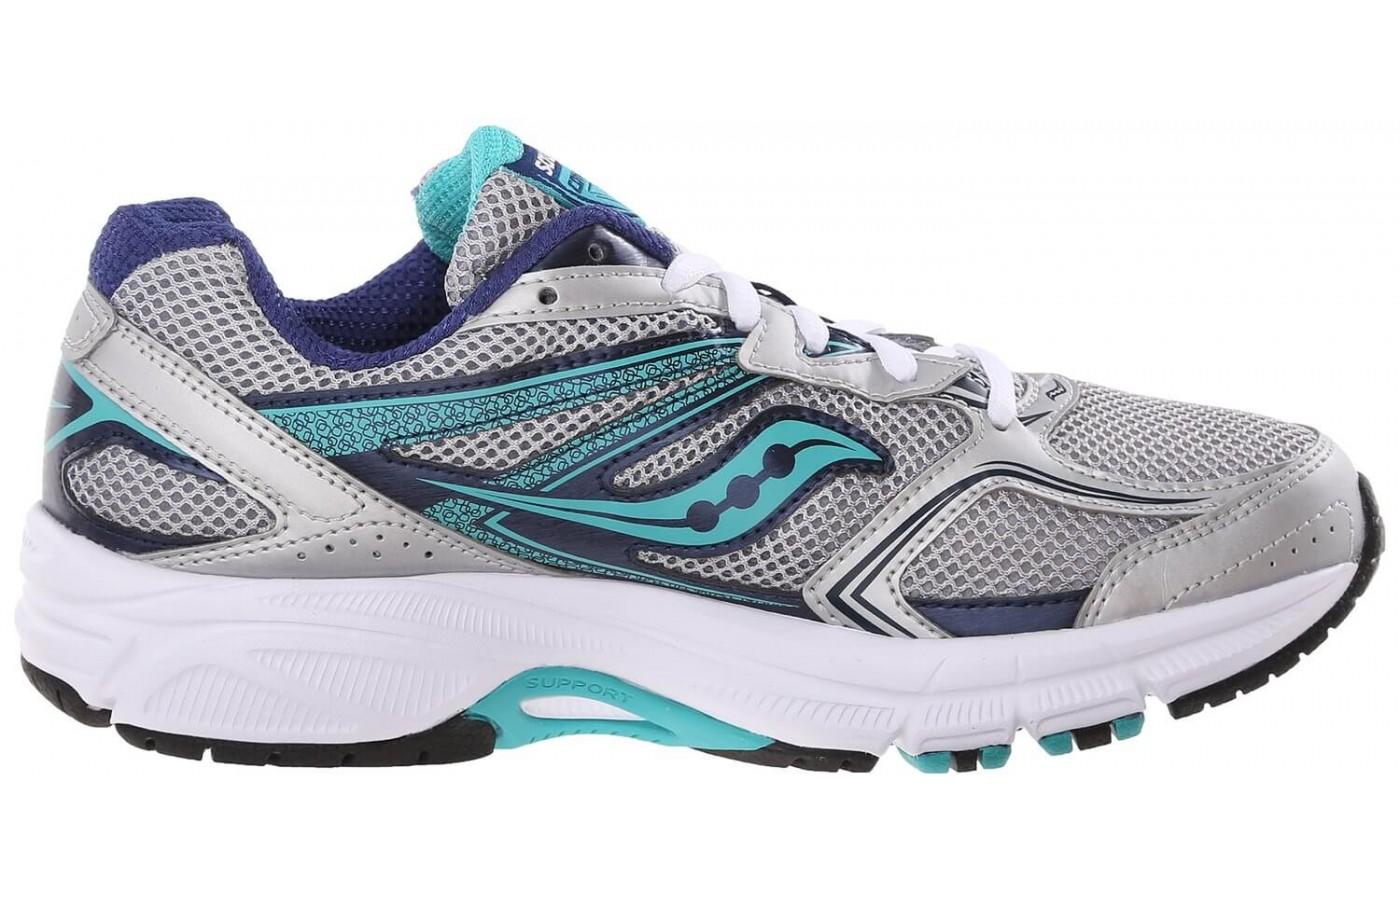 The Saucony Cohesion 9 midsole features ample cushioning with a light weight